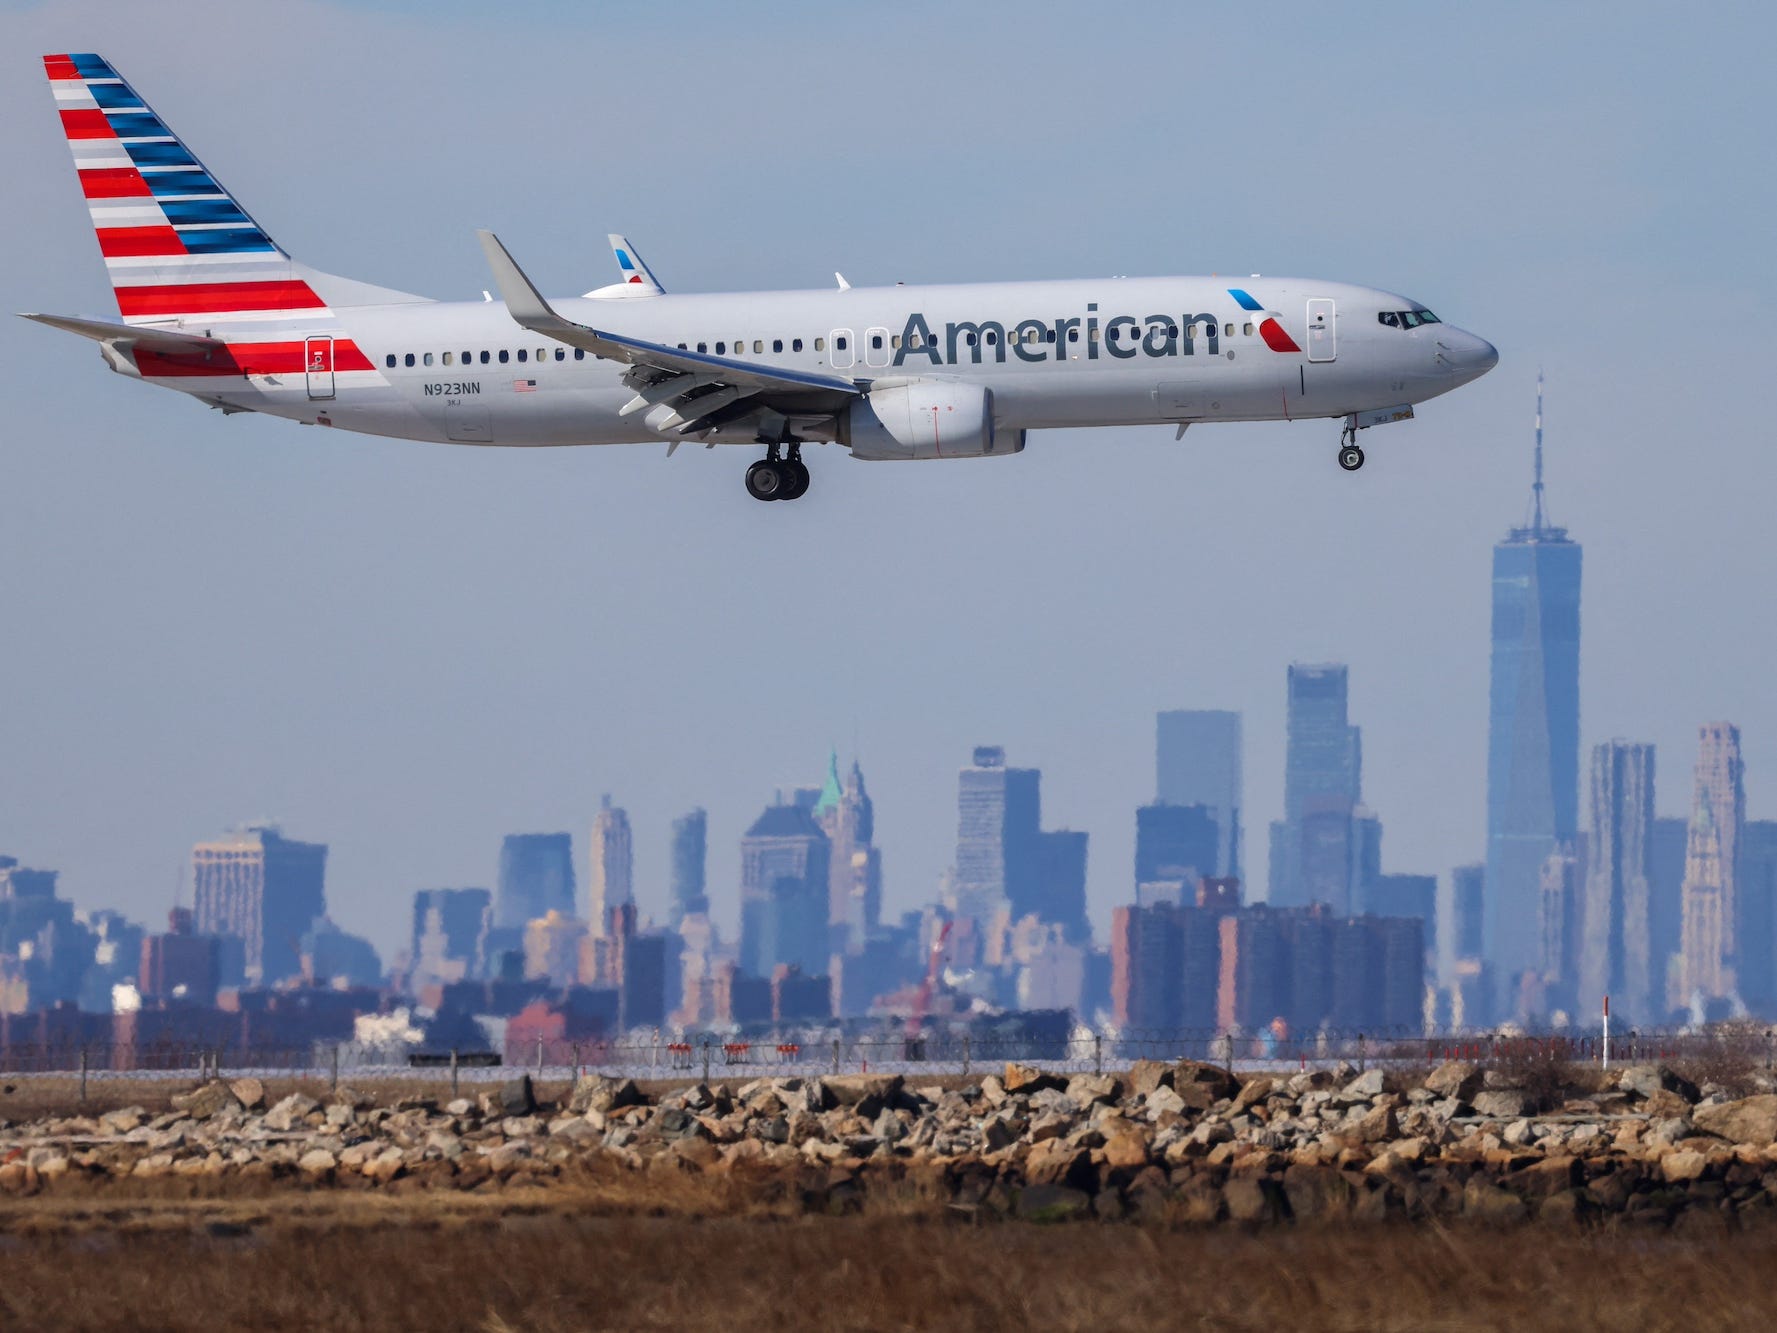 <p>Pilots, aviation maintenance technicians, and flight attendants are three jobs where you don't necessarily need to have a degree at American Airlines.</p><p>Captain Cory Glenn of American Airlines said while the airline doesn't require a degree for pilots, the airline looks for professionals.</p><p>"We look for people who exhibit some of the core features of our corporate culture — and a lot of that has to do with caring for people and taking care of not just our customers, but also taking care of our colleagues and our employees," Glenn said. "There are ways to do that while you're doing training."</p><p>"It can be as simple as when you're going through flight school, working with study groups and stepping up to do student leadership roles in those flight schools, taking opportunities to kind of expand your horizons as an individual and just continuously be in a place of constant improvement and exhibiting that," Glenn added.</p><p>Glenn said airline pilots can be either a first officer or a captain and that this work is "probably the most customizable career" given it "allows you to adapt the amount of work and where you work and how you work and what you make to the things that are important to your life."</p><p>Even though there may not be a degree needed, aspiring pilots will need to meet some requirements to be a pilot like the ones mandated by the <a href="https://www.faa.gov/pilots/become">Federal Aviation Administration</a>, per Glenn.</p><p>Kozetta Chapman, senior manager of tech ops recruiting and development at American Airlines, also noted to BI a few roles where people don't necessarily need a four-year degree, including material logistics specialists, aircraft cleaners, and welders.</p><p><em>Did you decide not to get a college degree? Share your experience and what you do for work with this reporter at </em><a href="mailto:mhoff@businessinsider.com"><em>mhoff@businessinsider.com</em></a><em>.</em></p>